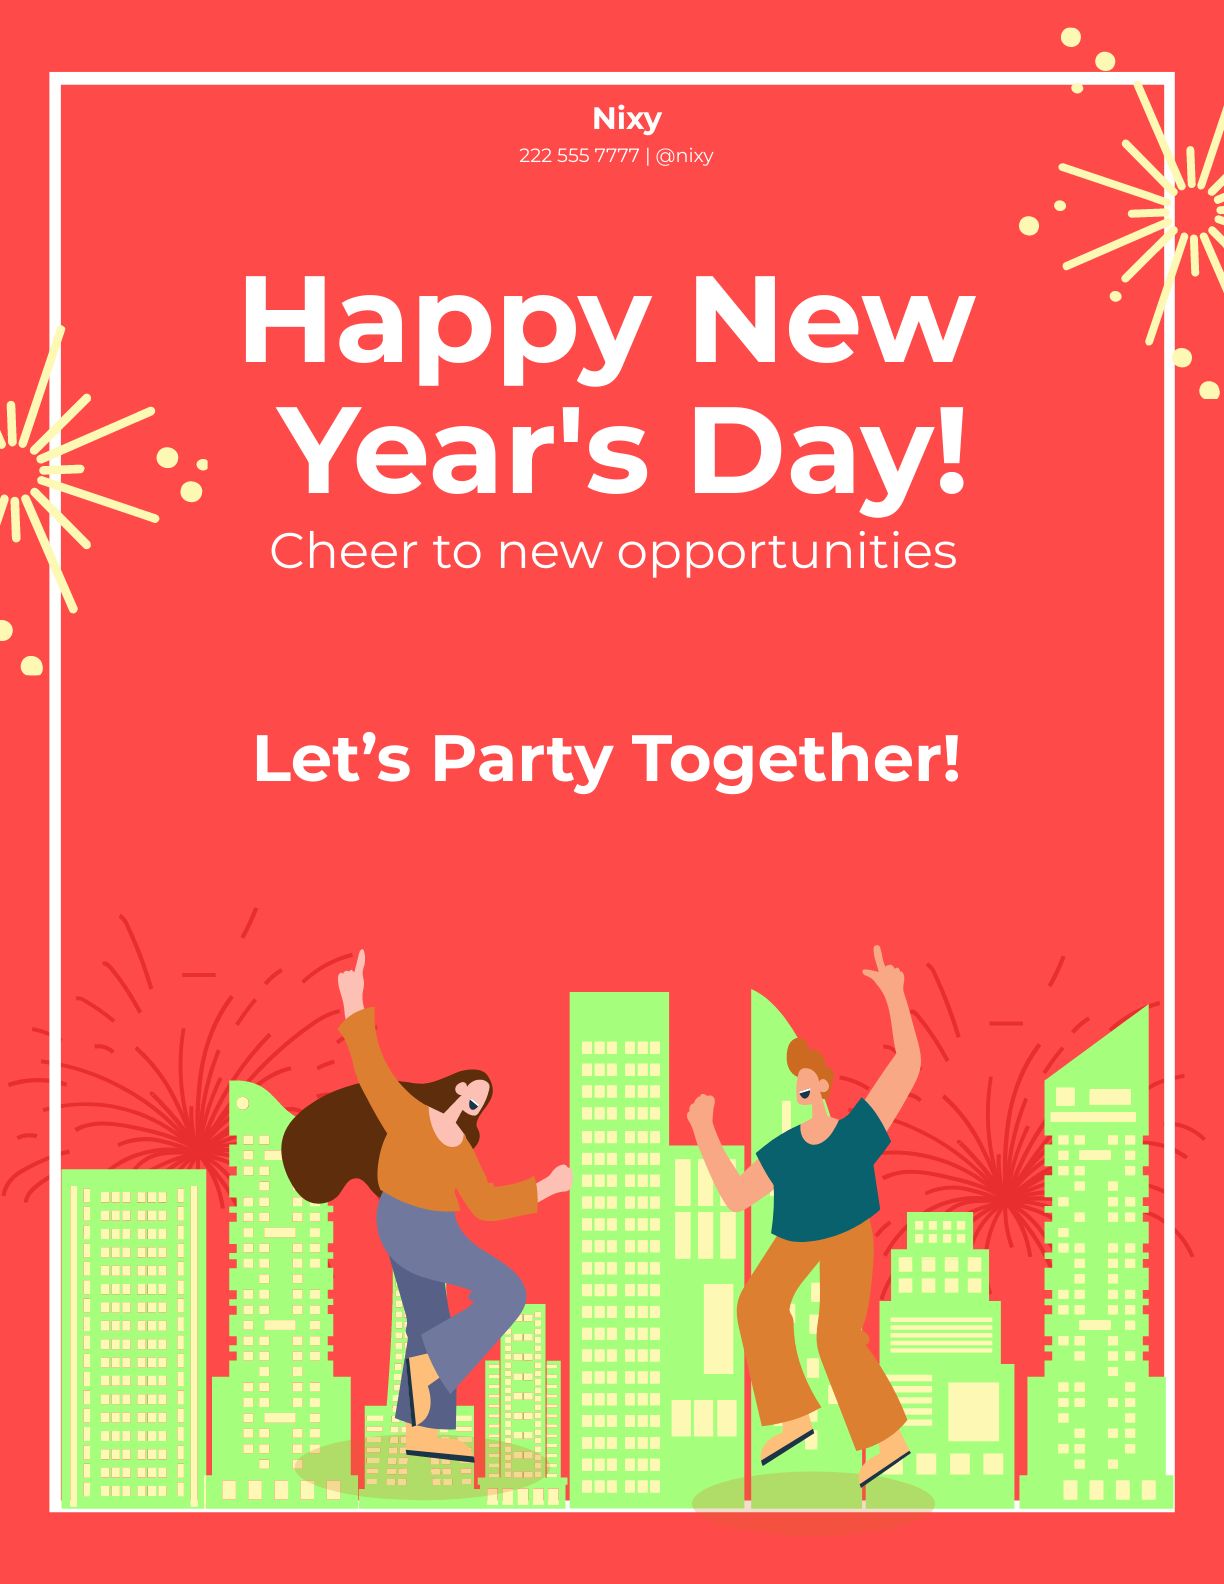 Free Happy New Year's Day Flyer in Word, Google Docs, Illustrator, PSD, EPS, SVG, JPG, PNG